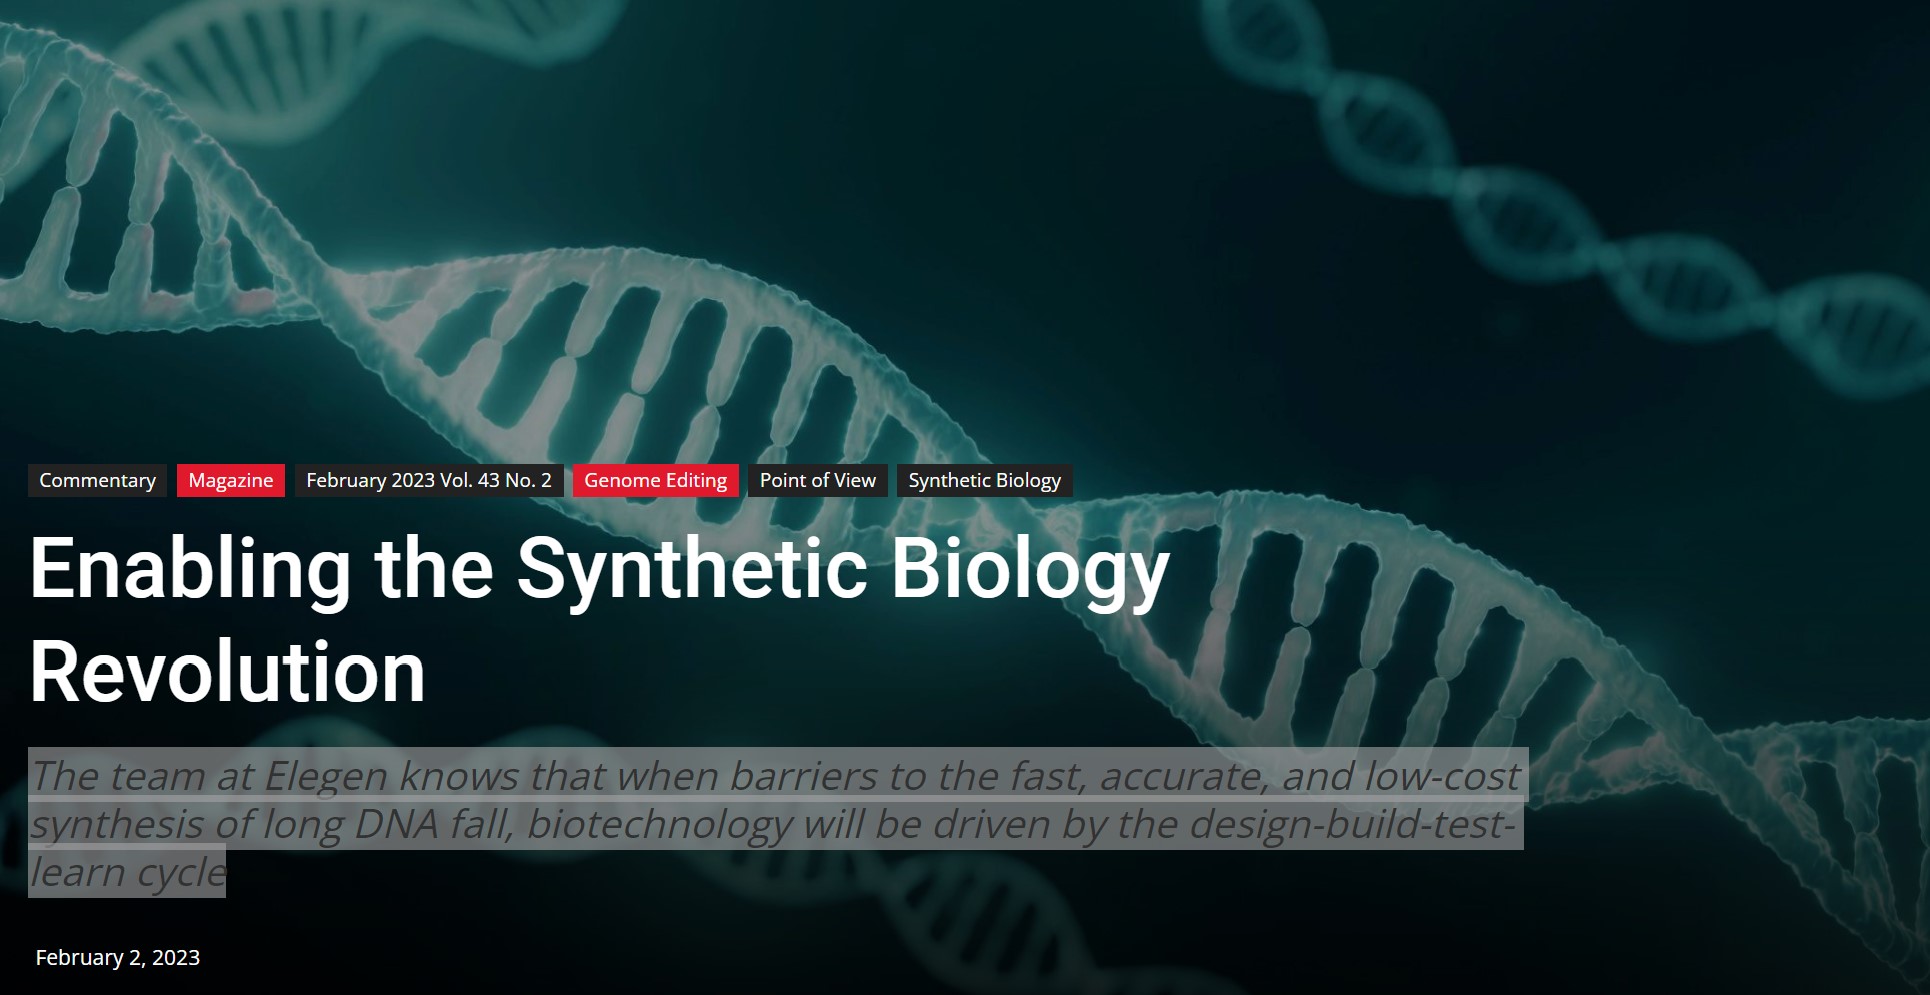 Enabling the Synthetic Biology Revolution